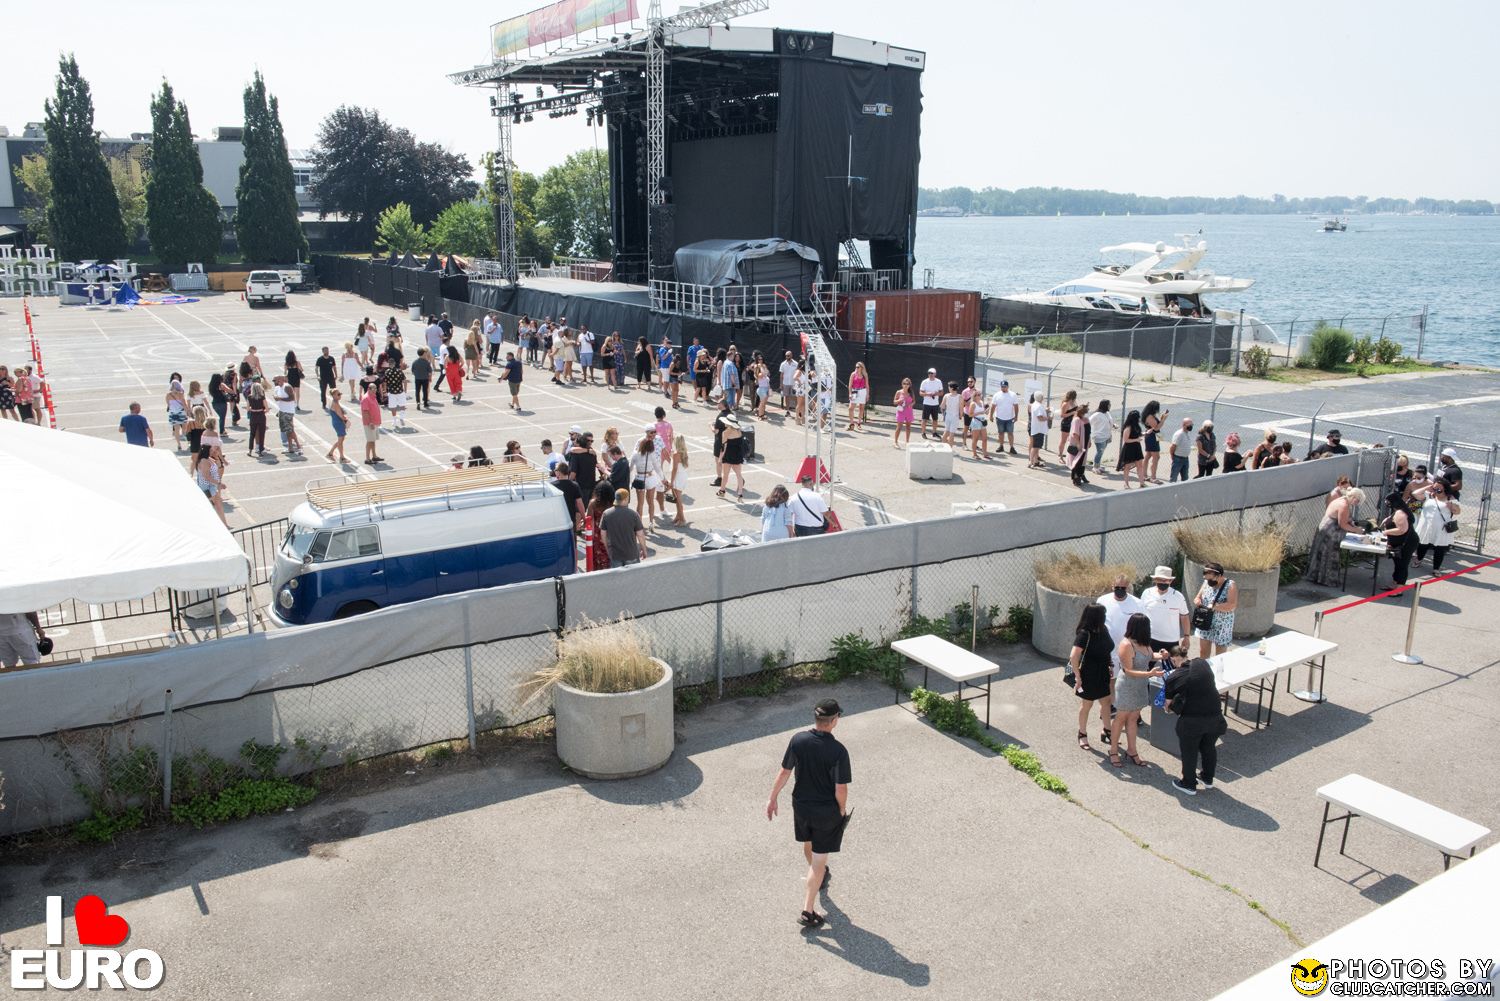 Empress Of Canada party venue photo 402 - August 22nd, 2021